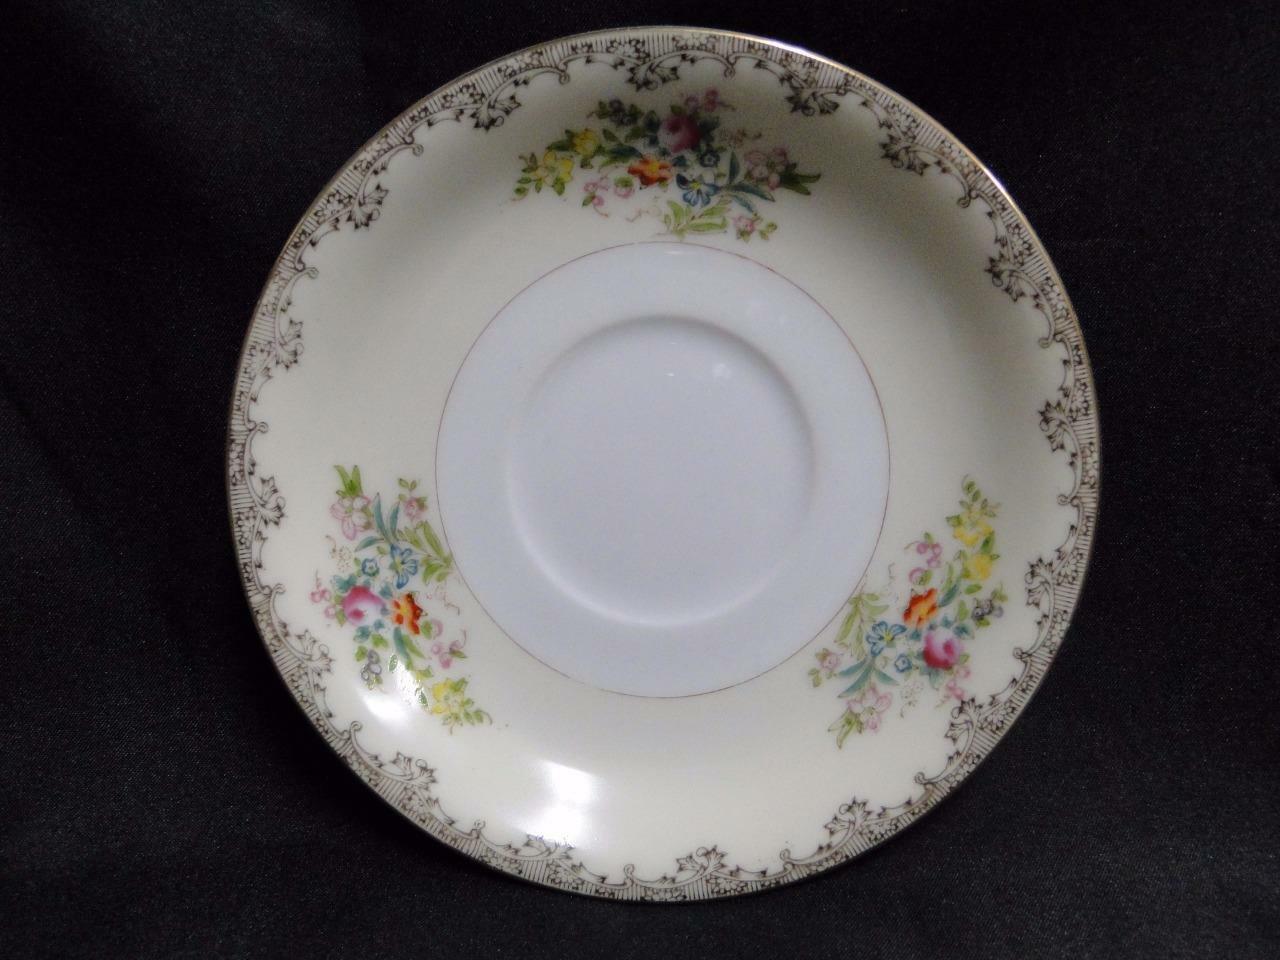 Meito Burbank, Gold Trim: 6" Saucer (s) Only, No Cup